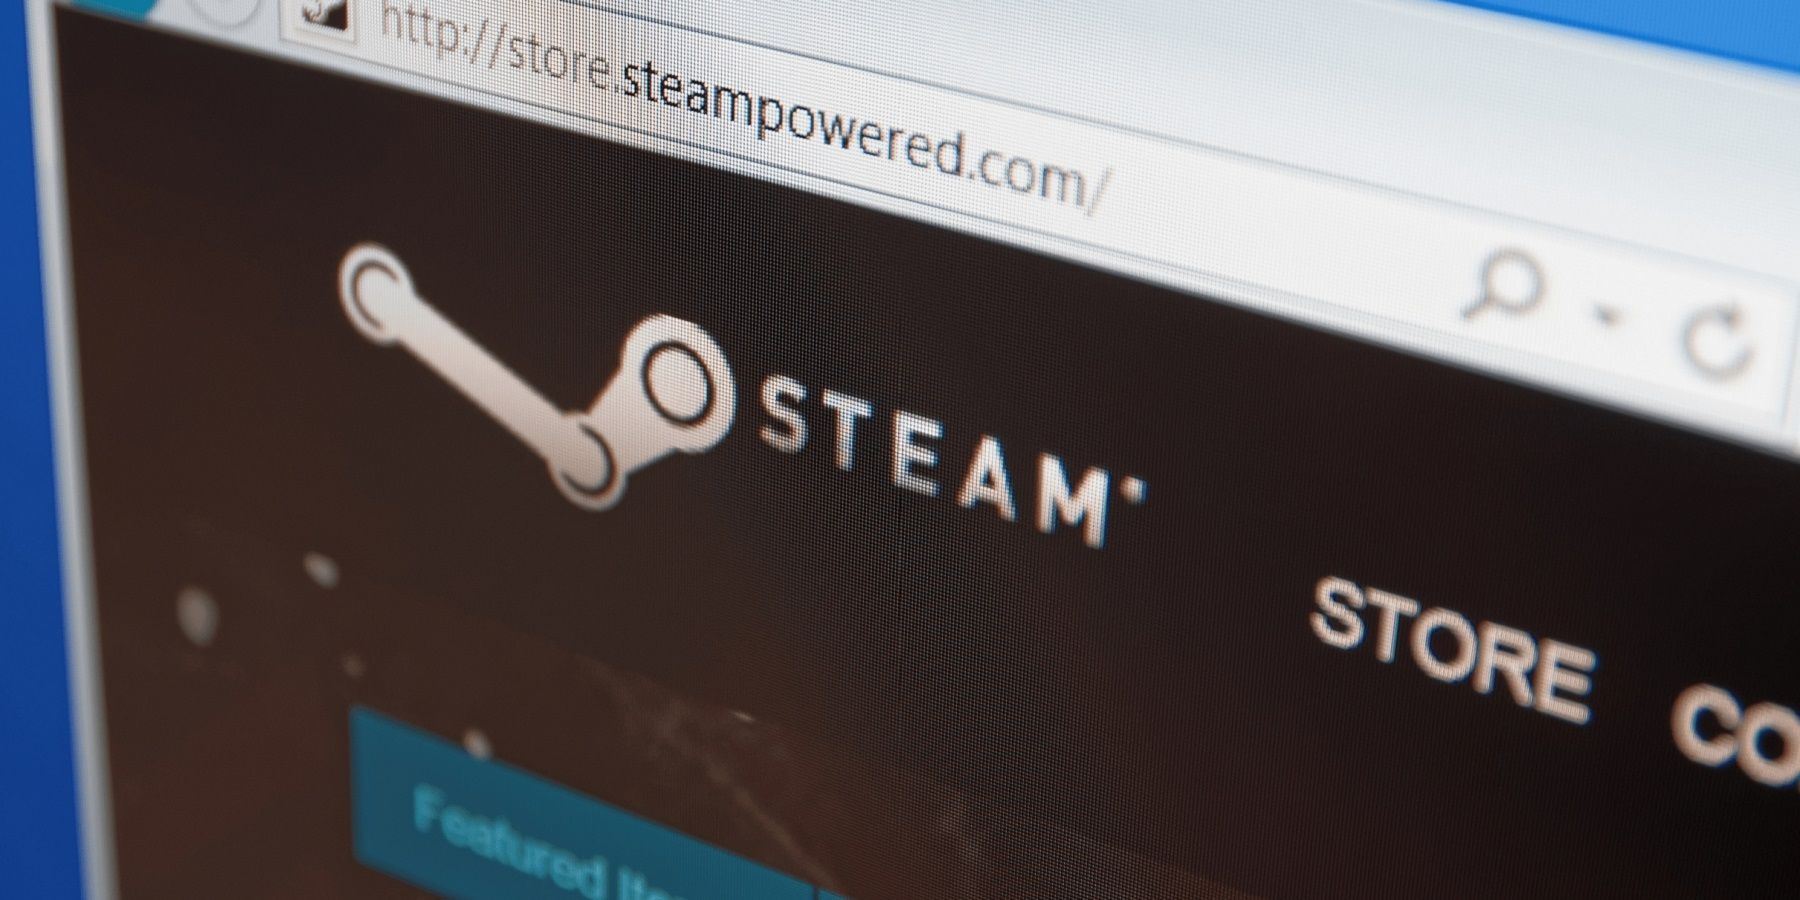 A close-up image of Steam desktop mode showing the logo.